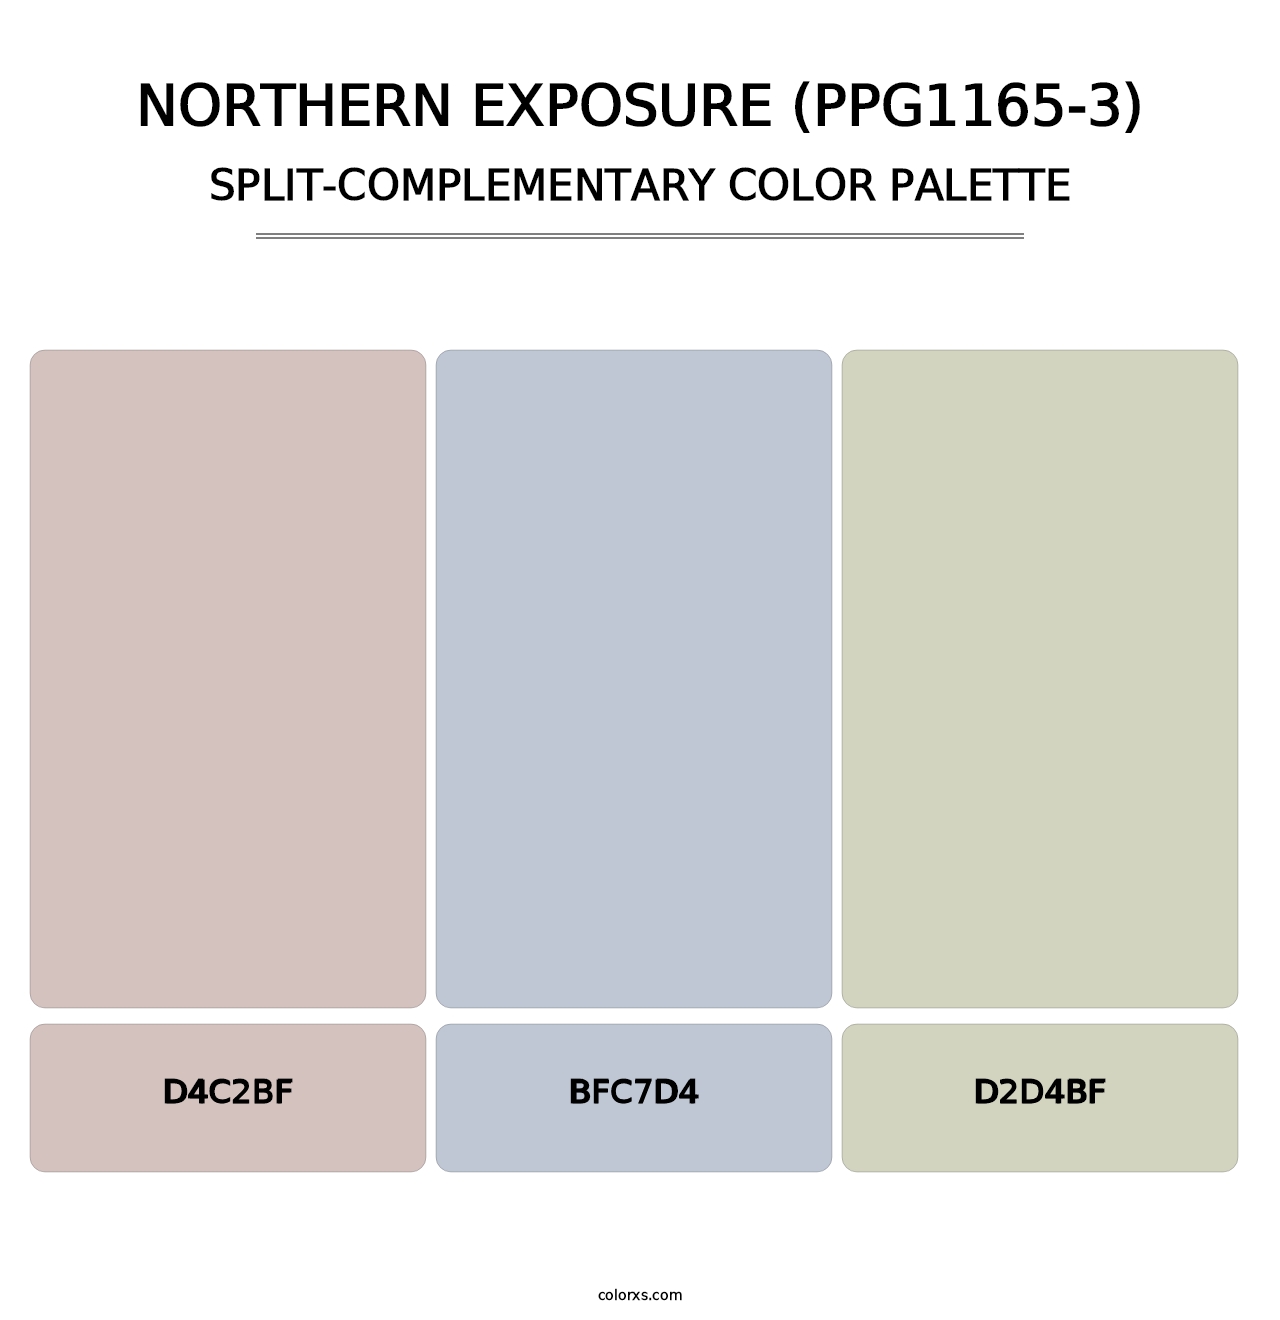 Northern Exposure (PPG1165-3) - Split-Complementary Color Palette